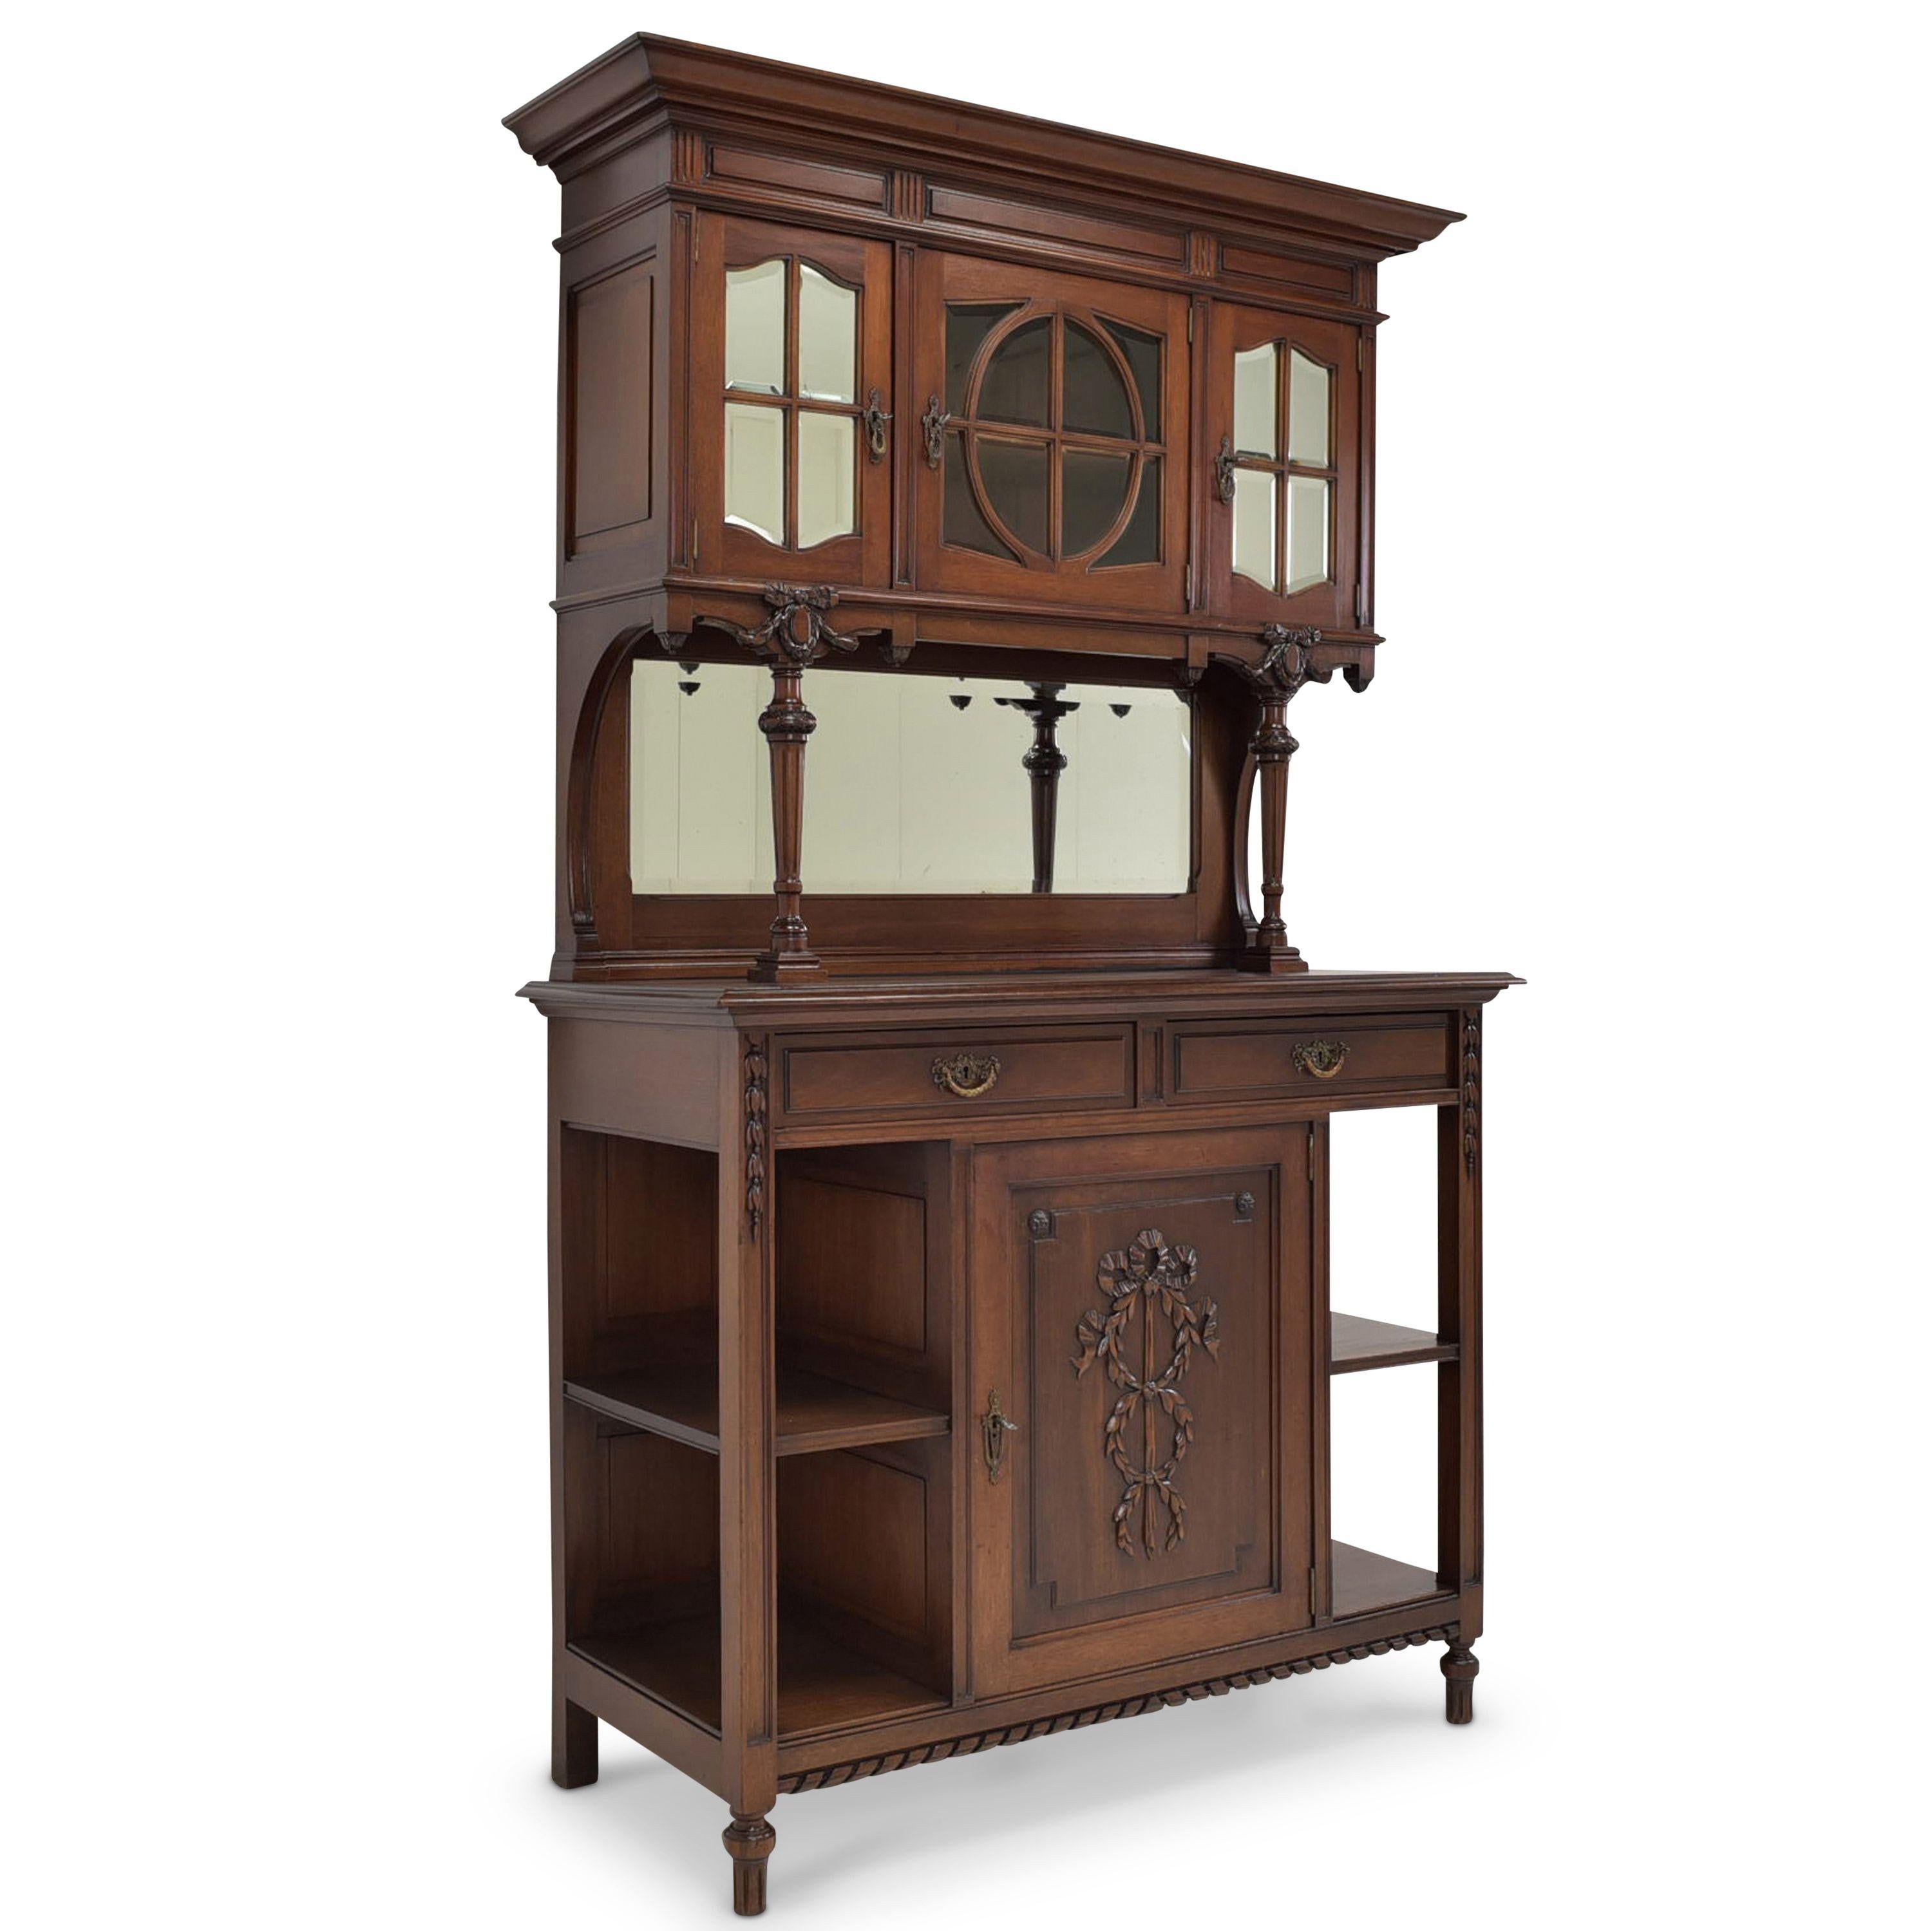 Buffet cabinet restored historicism / Louis XVI around 1910 solid mahogany

Features:
Single-door base with open sides and two drawers
Three-door essay on columns set inwards
Very high quality processing
Drawers pronged
Original